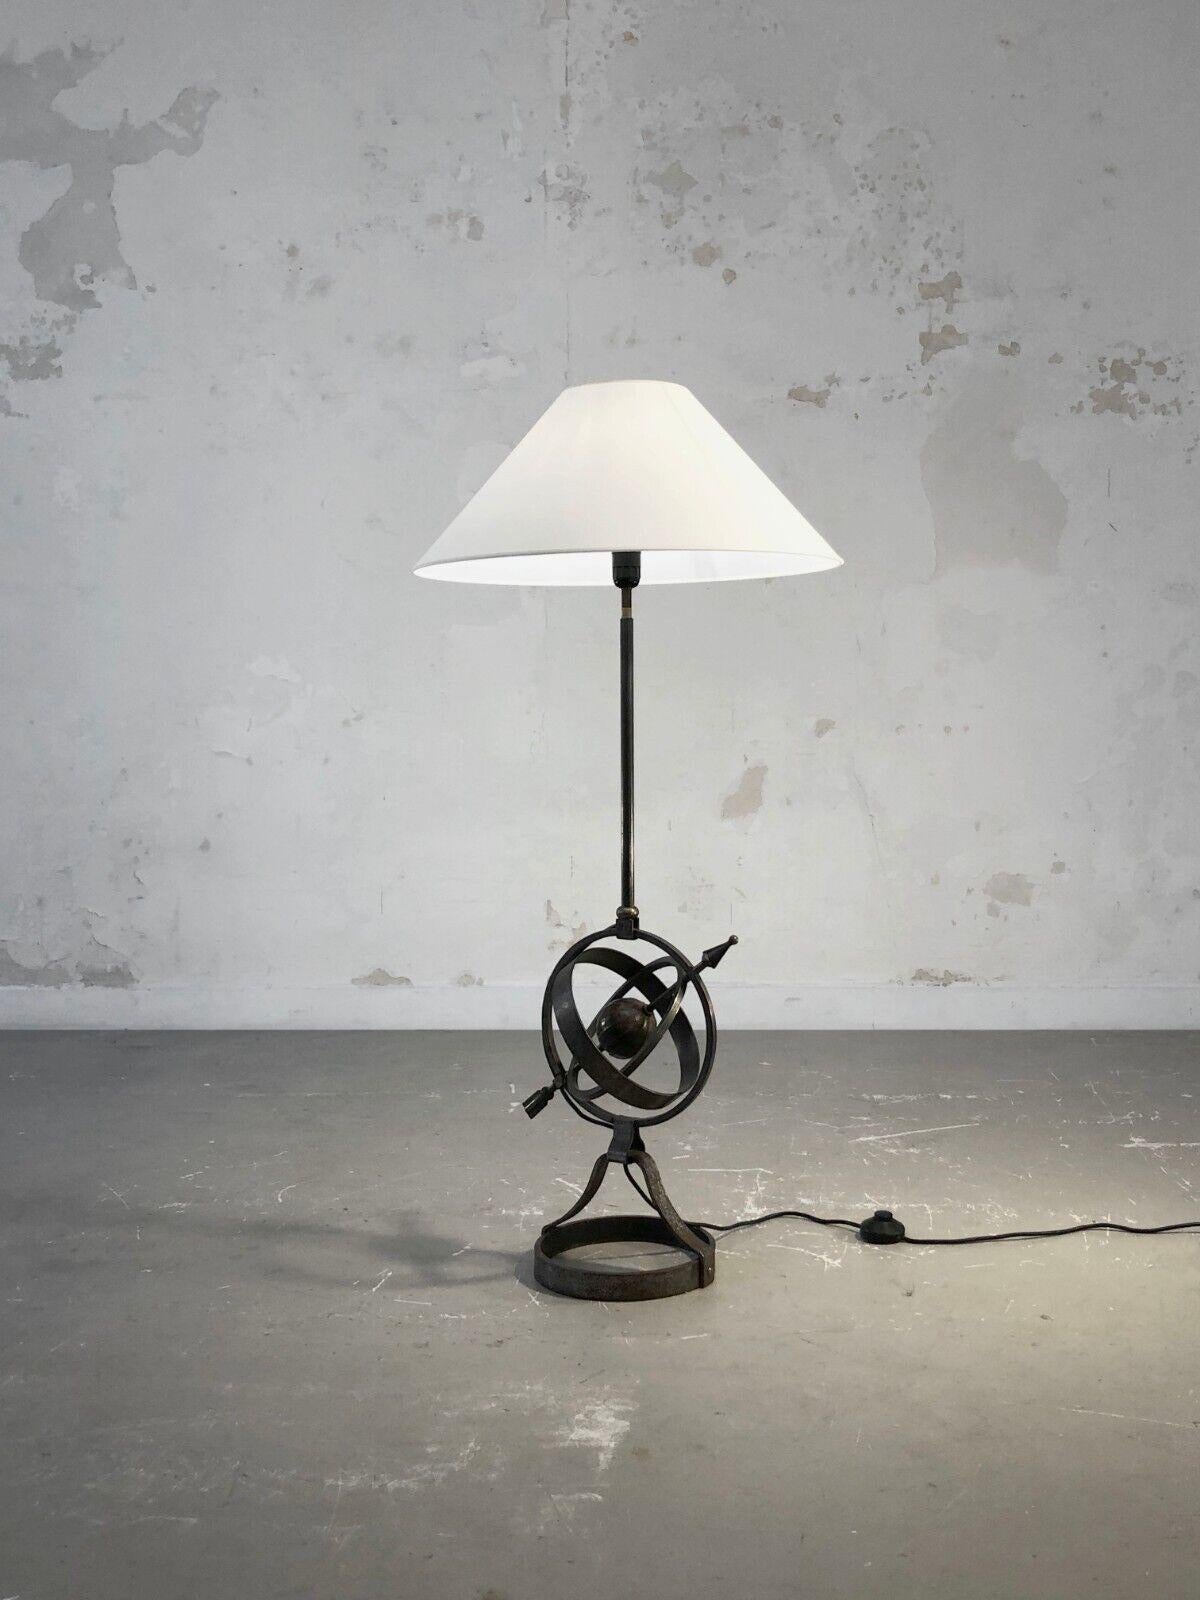 A small floor lamp or reading lamp of naval and traveler inspiration, at the crossorver of Neo-Classical and Brutalist spirits, solid wrought iron structure with a superb old world map in suspension, by Jean-Pierre Ryckaert, France